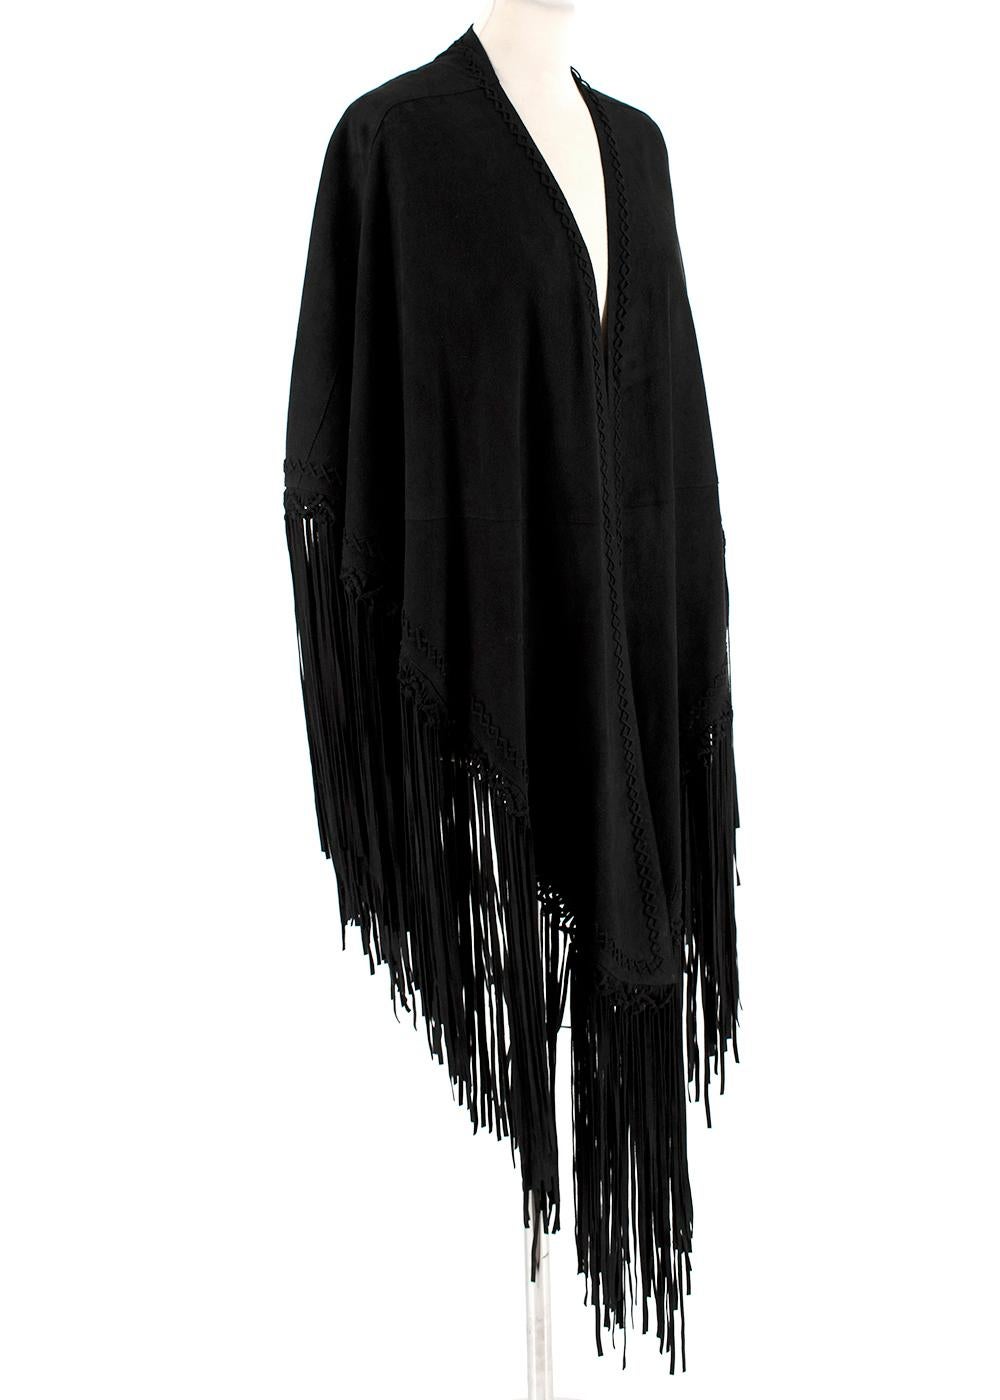 Talitha Black Suede Fringed Shawl 

- Black suede leather shawl 
- Fringed trimming throughout 
- Slip on style 
- Mid-weight, non-stretchy fabric
- Oversized style, cut to be worn loose

Materials: 
100% Suede (Goat) 

Dry Clean Only 

Length -